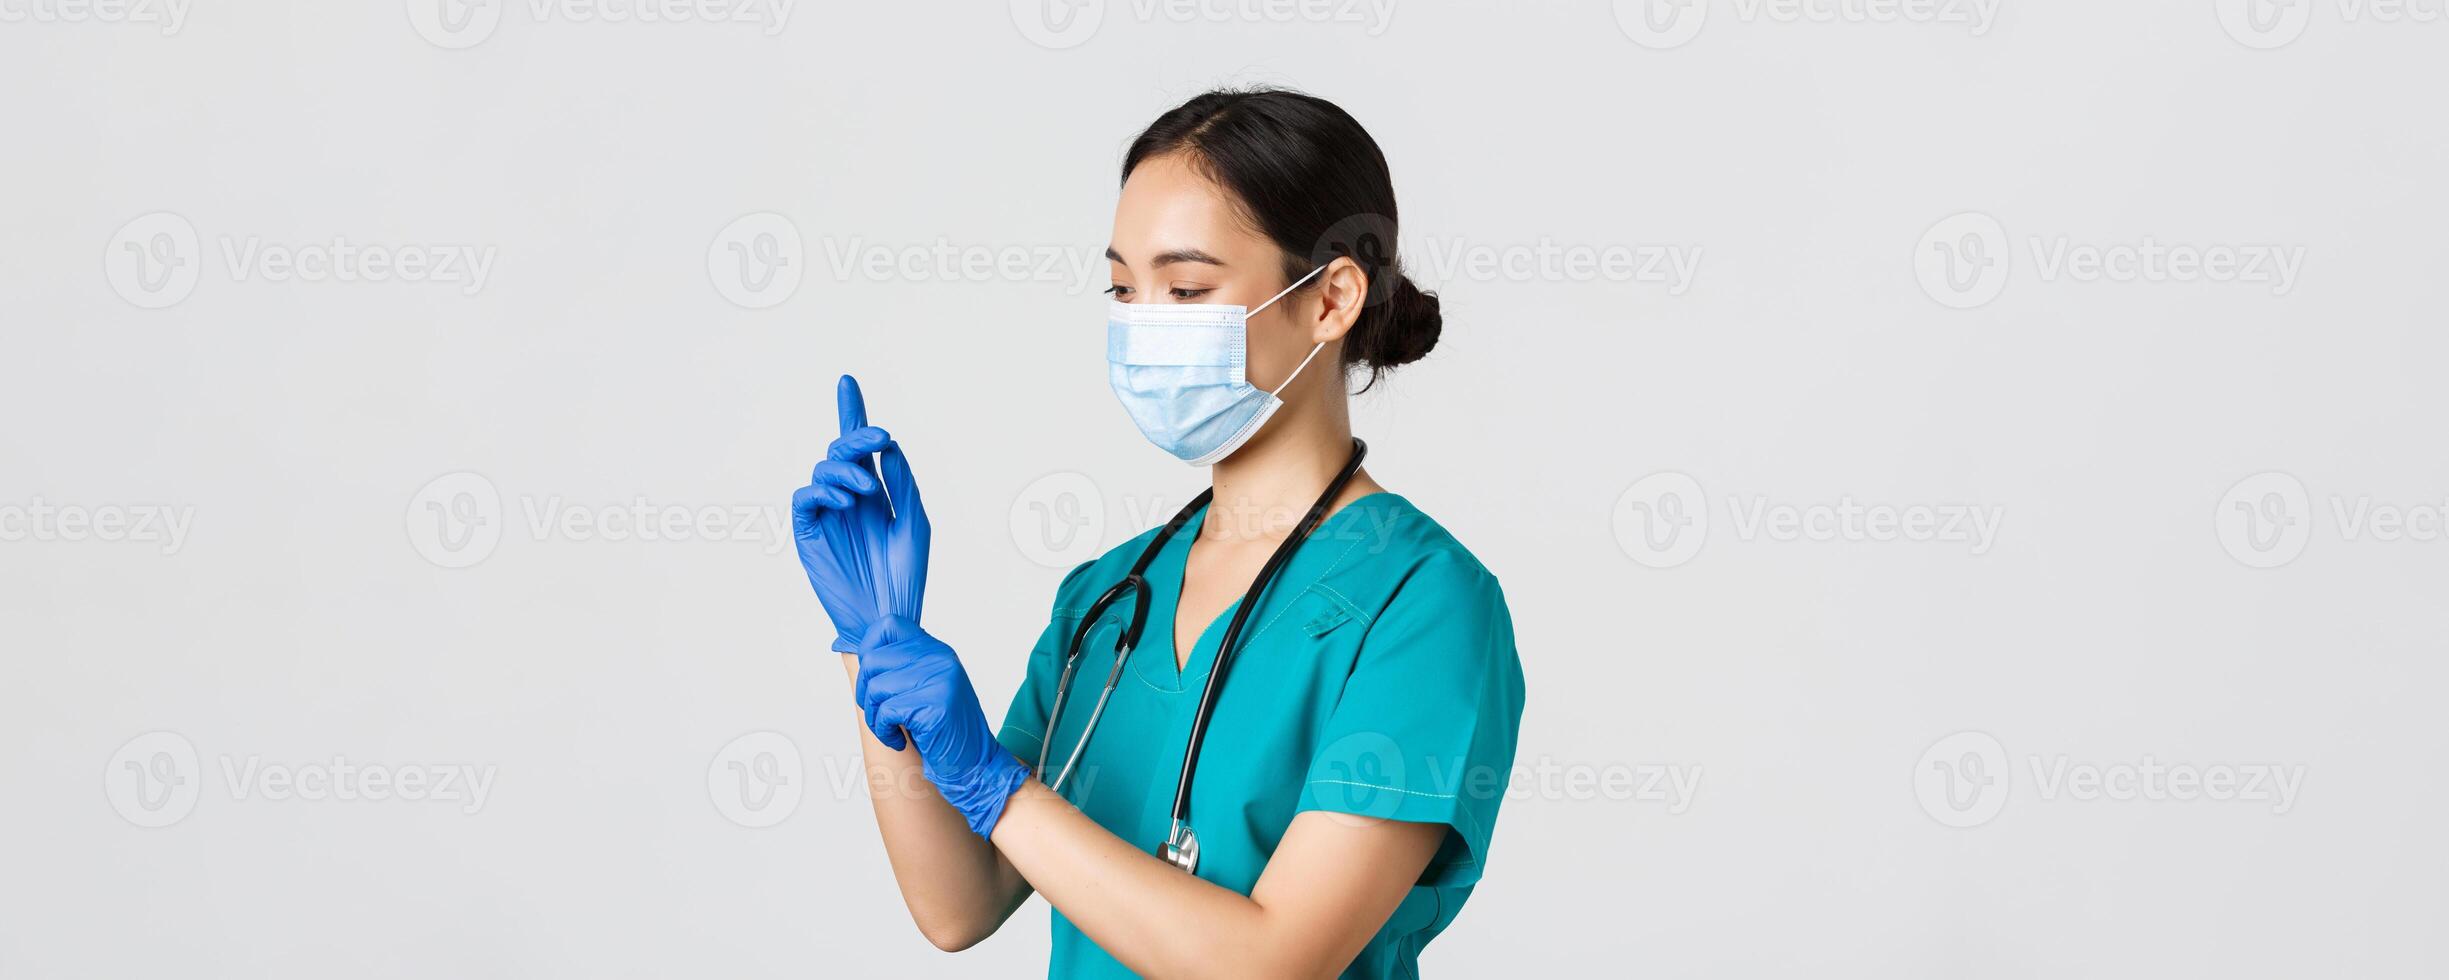 Covid-19, coronavirus disease, healthcare workers concept. Professional smiling asian female nurse, physician in scrubs and medical mask put on rubber gloves for checkup, patient examination photo